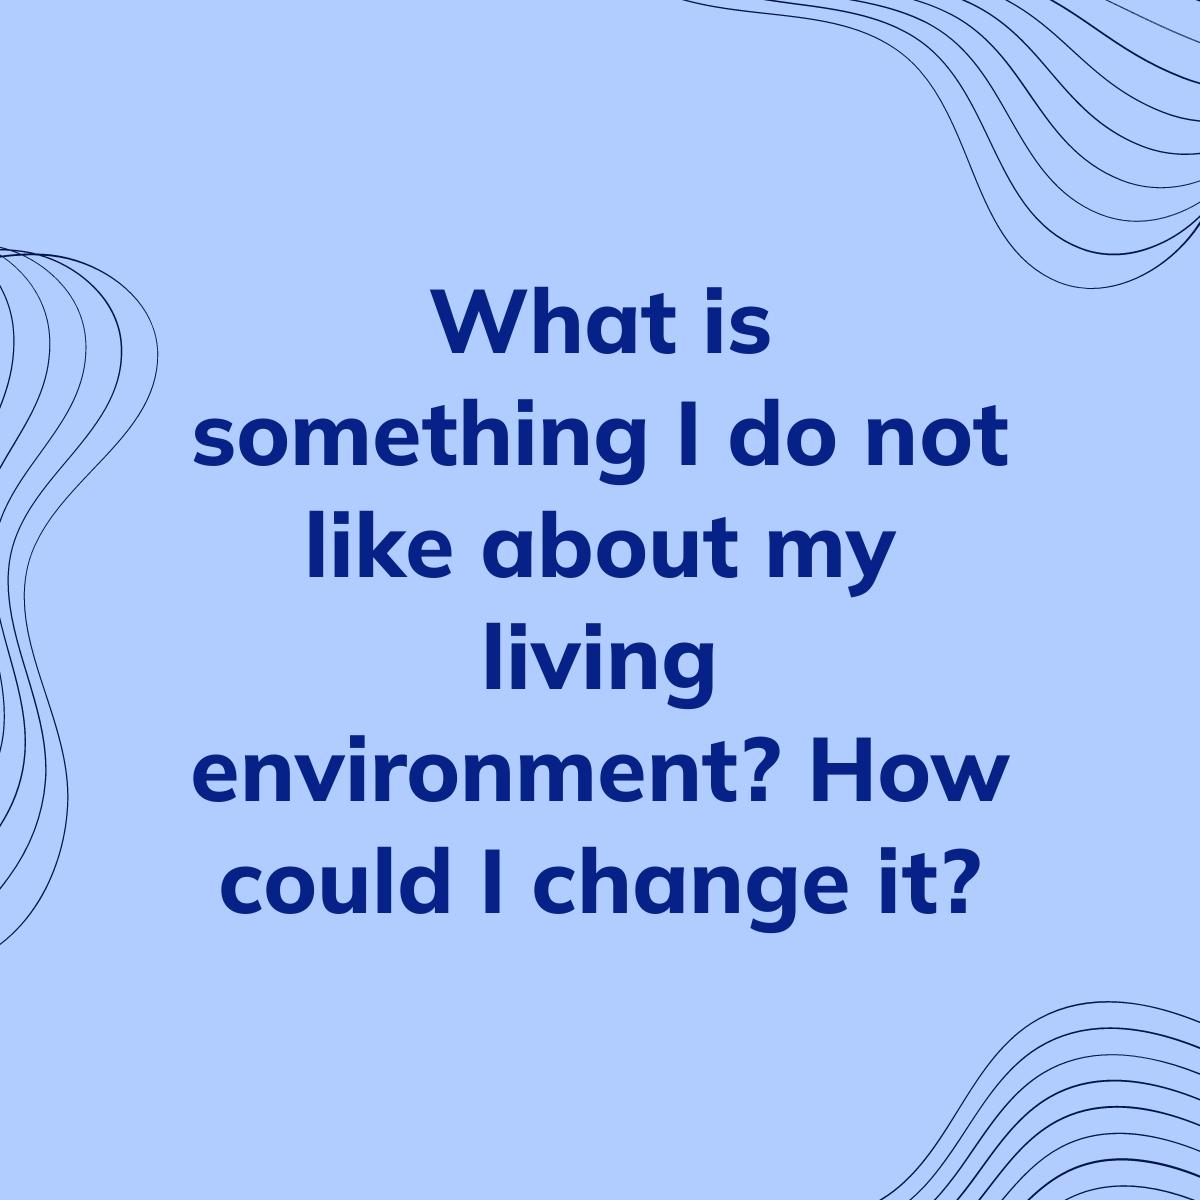 Journal Prompt: What is something I do not like about my living environment? How could I change it?